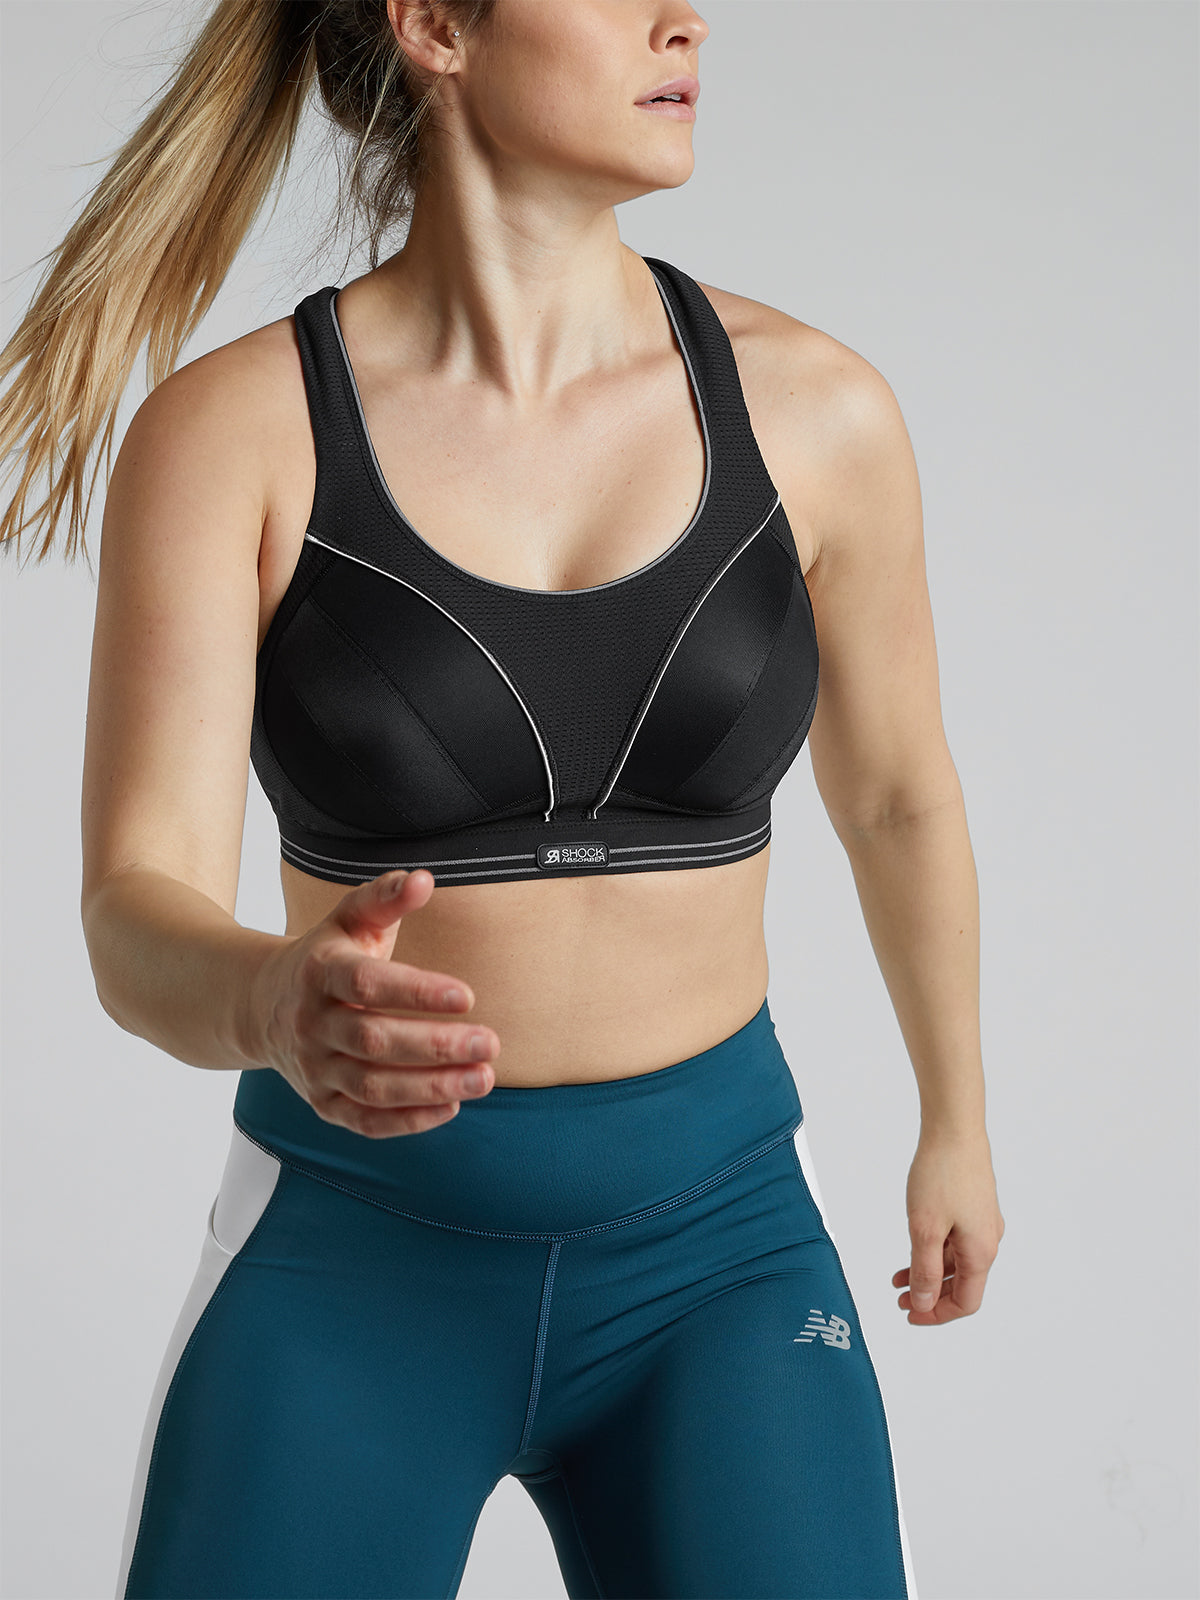 Many Benefits Of Wearing A Sports Bra - Fitness Clothing